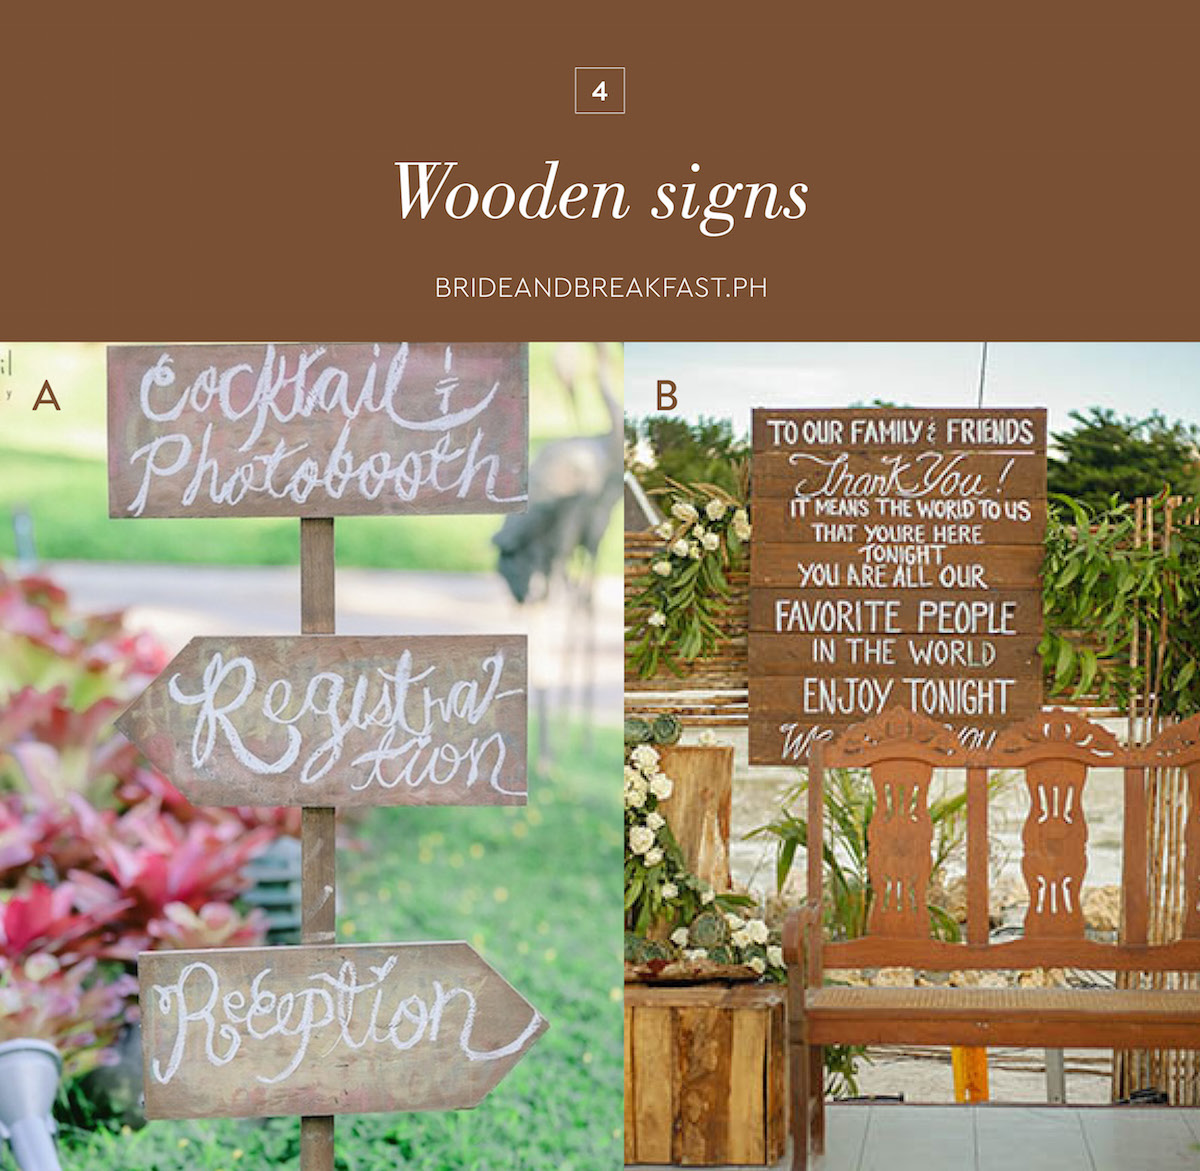 4 Wooden signs